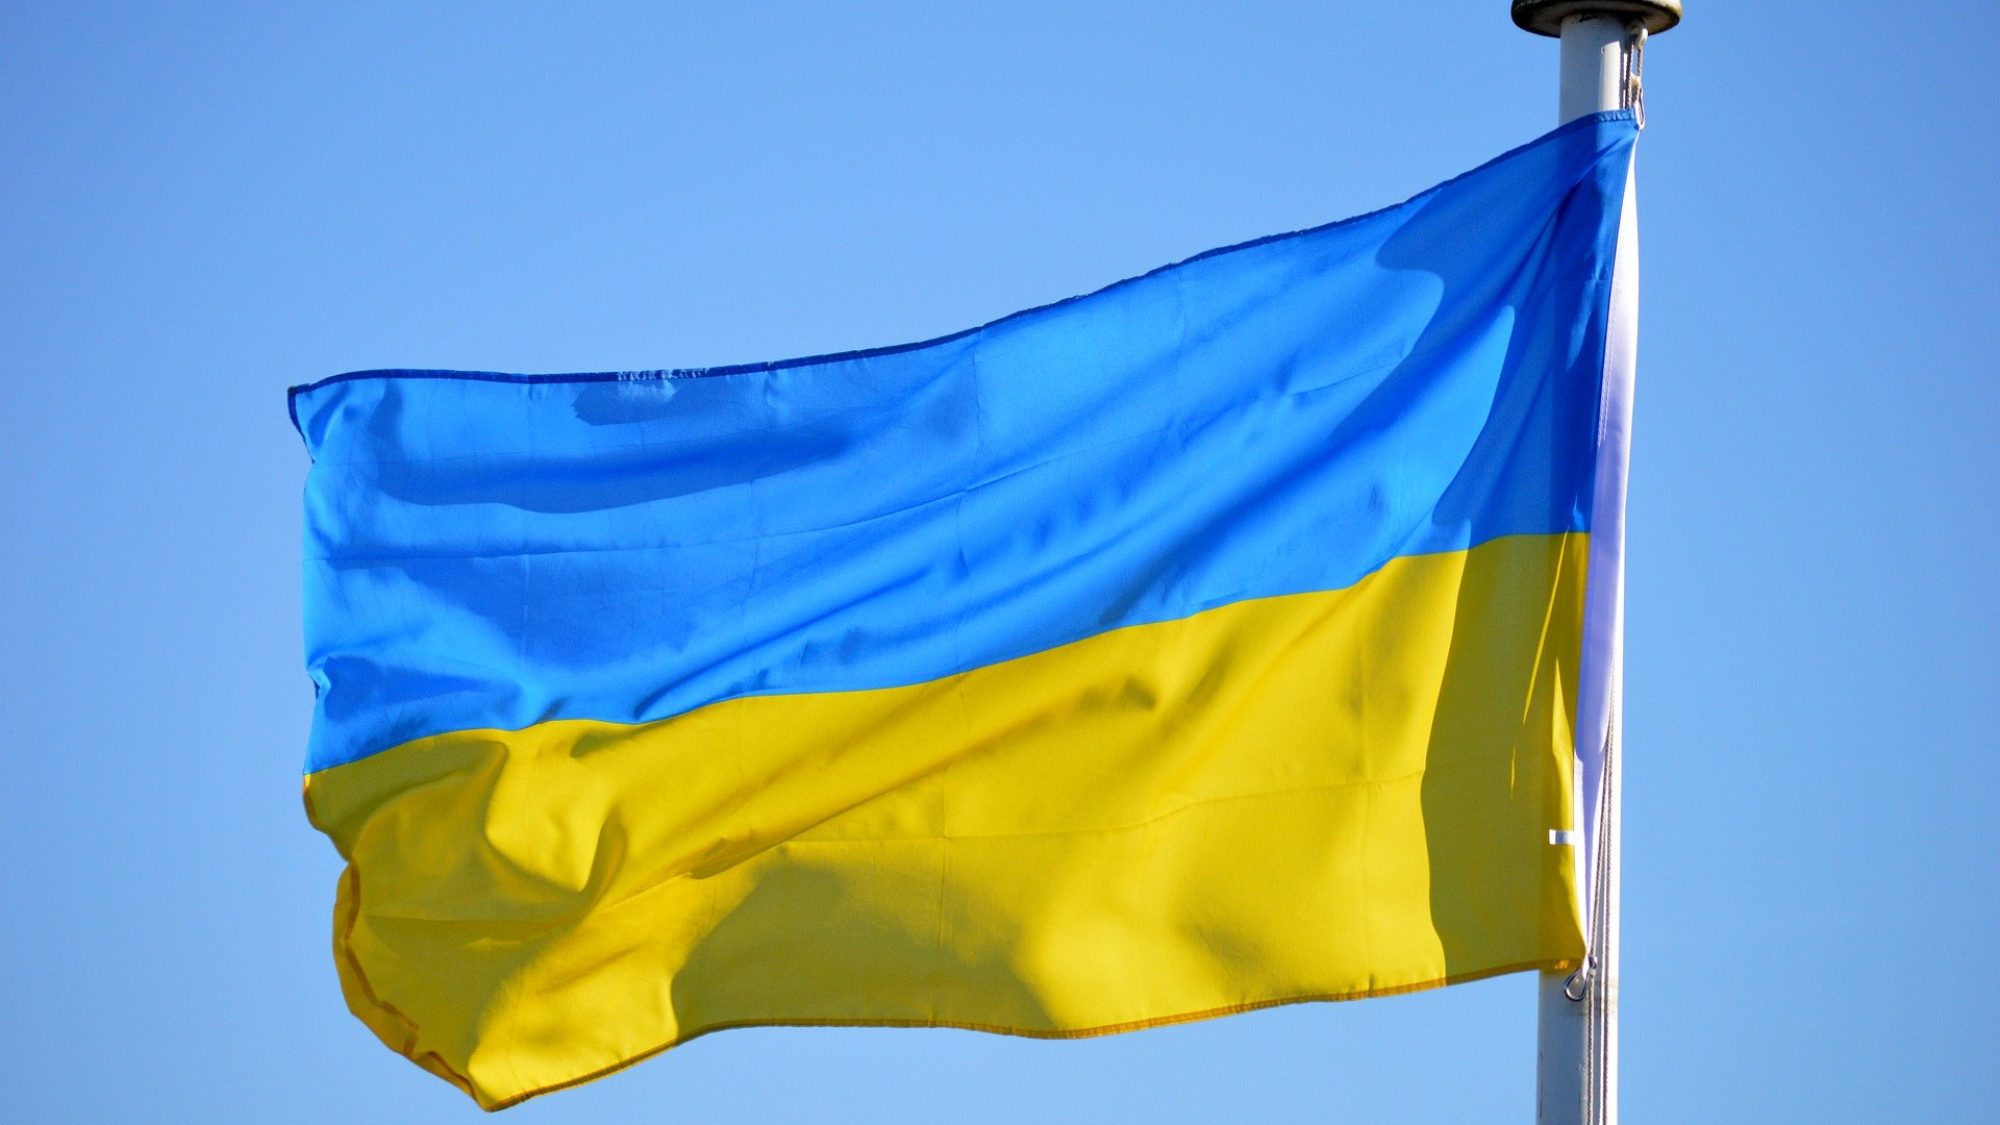 Ukraine flag on pole in front of blue sky.